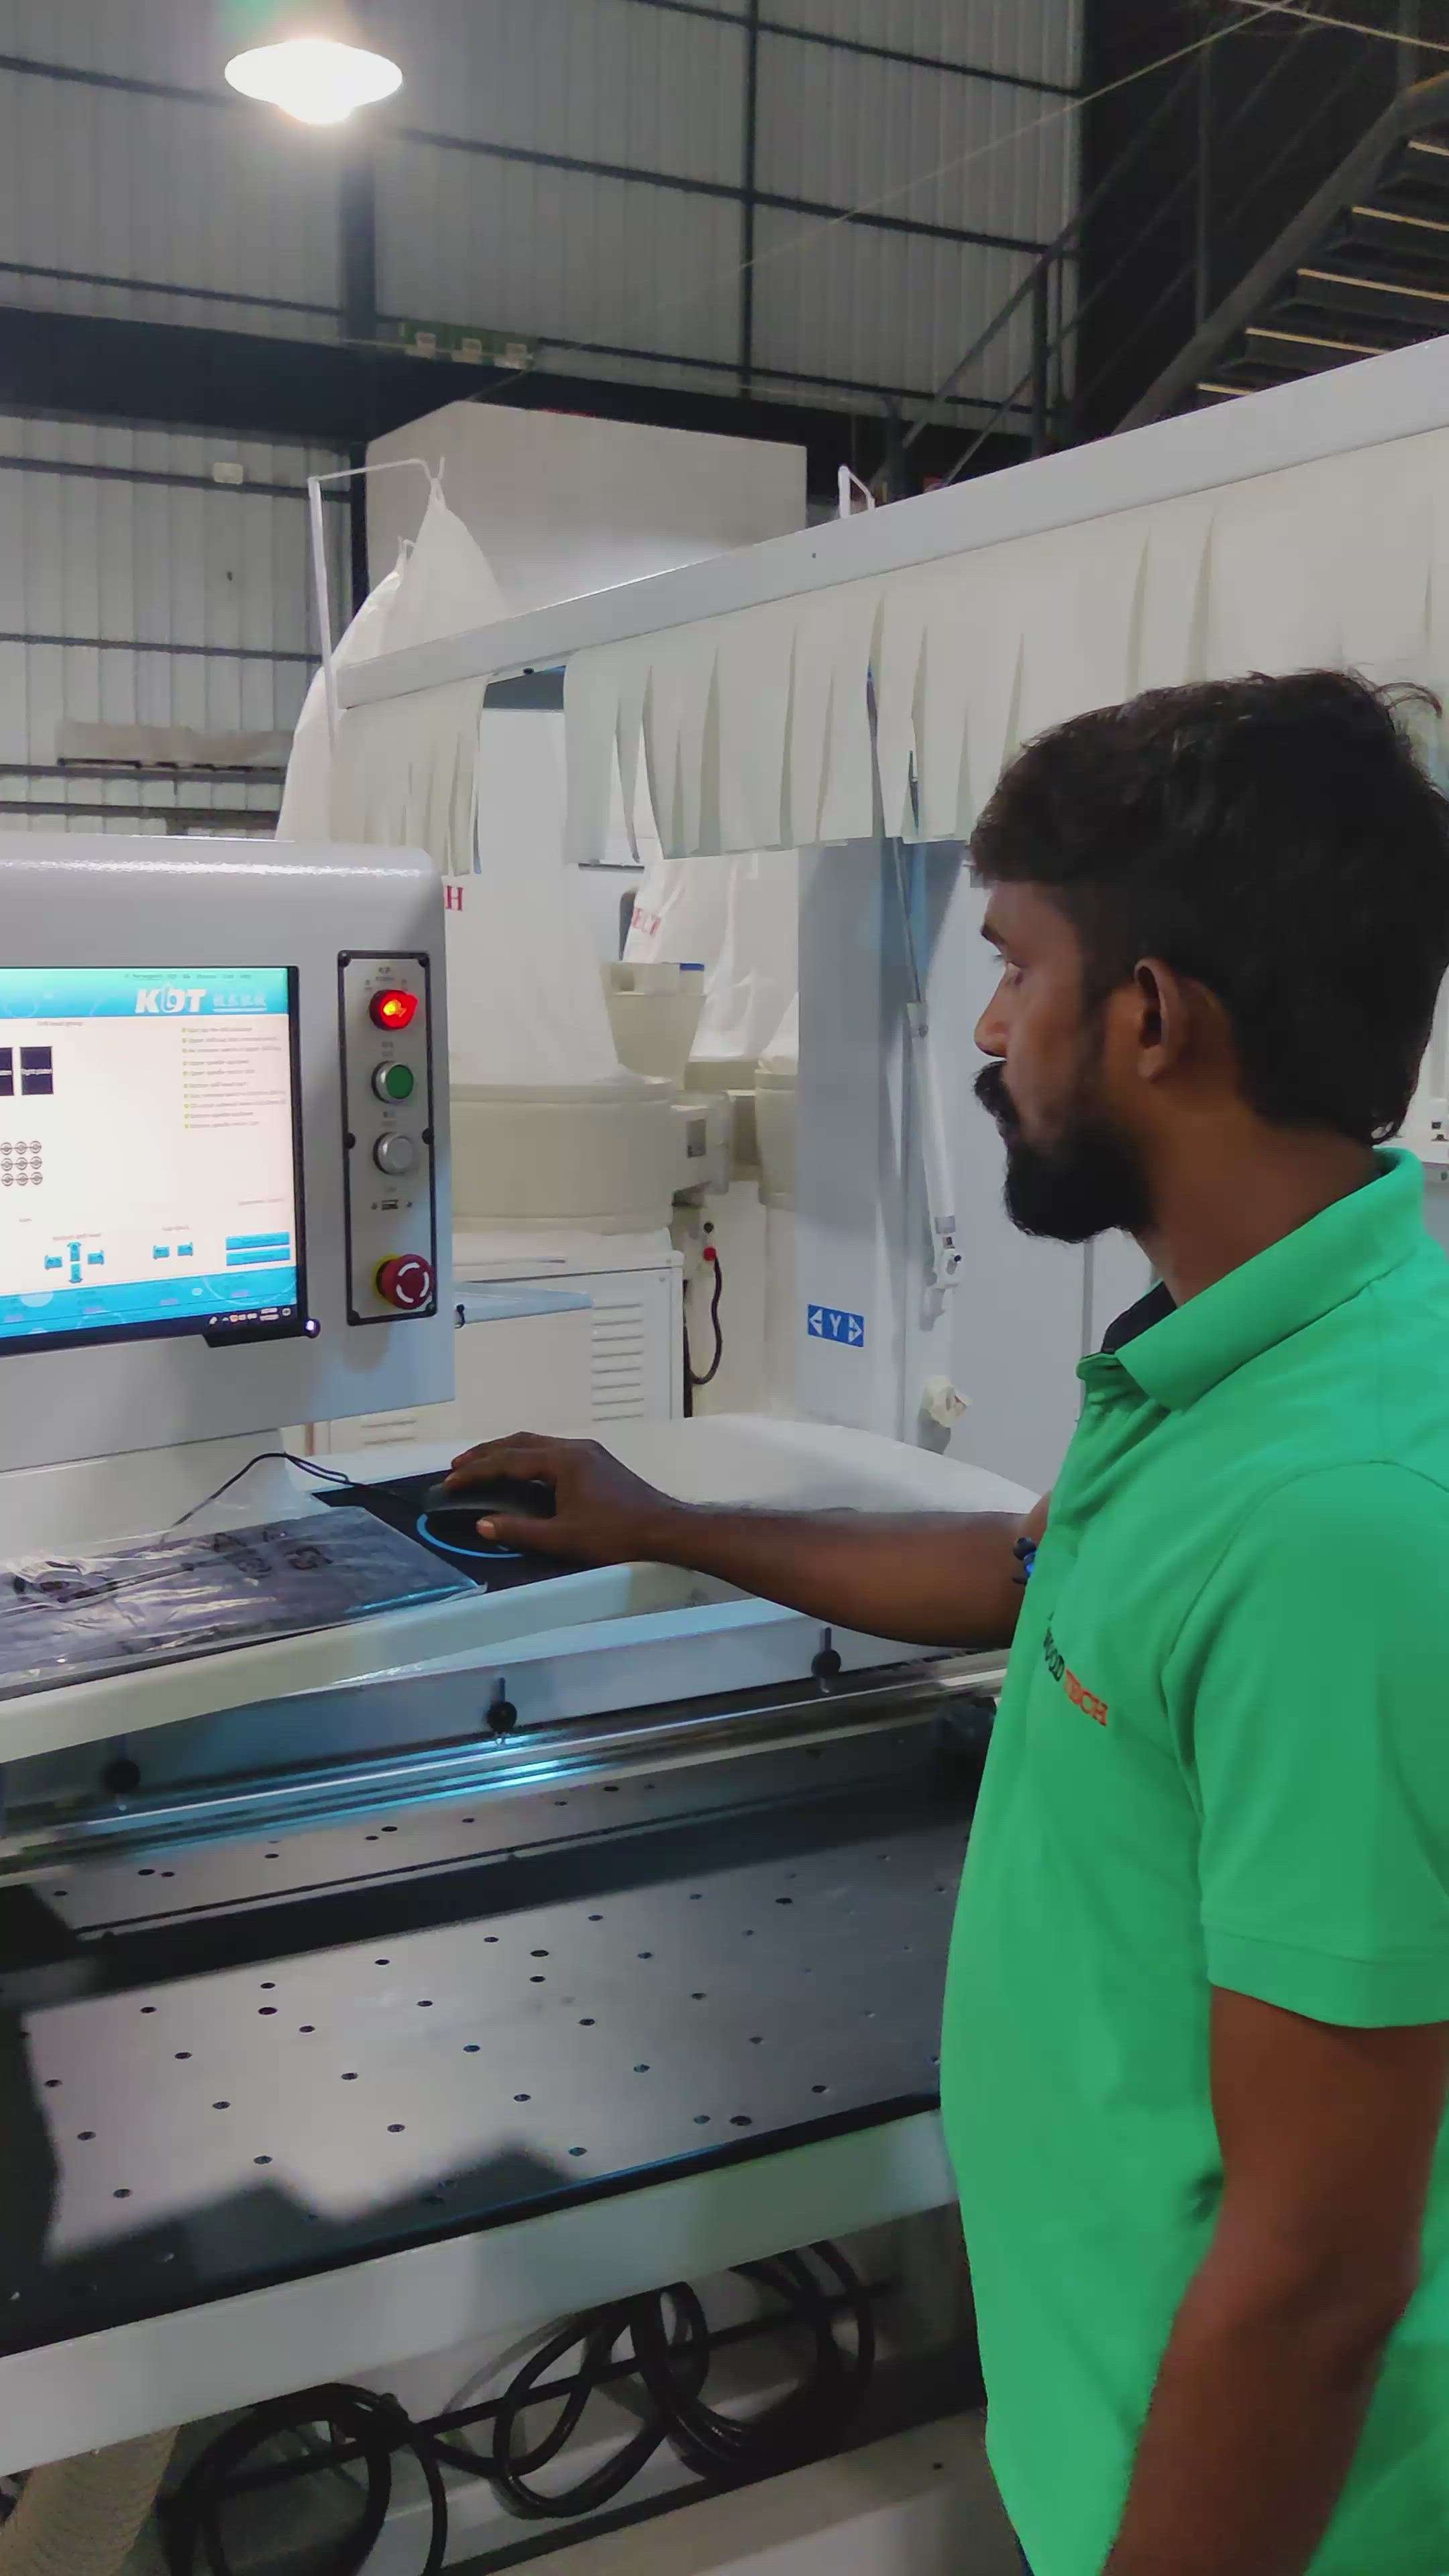 fully automated service for interior 
automatic cutting, automatic boring contact us for more